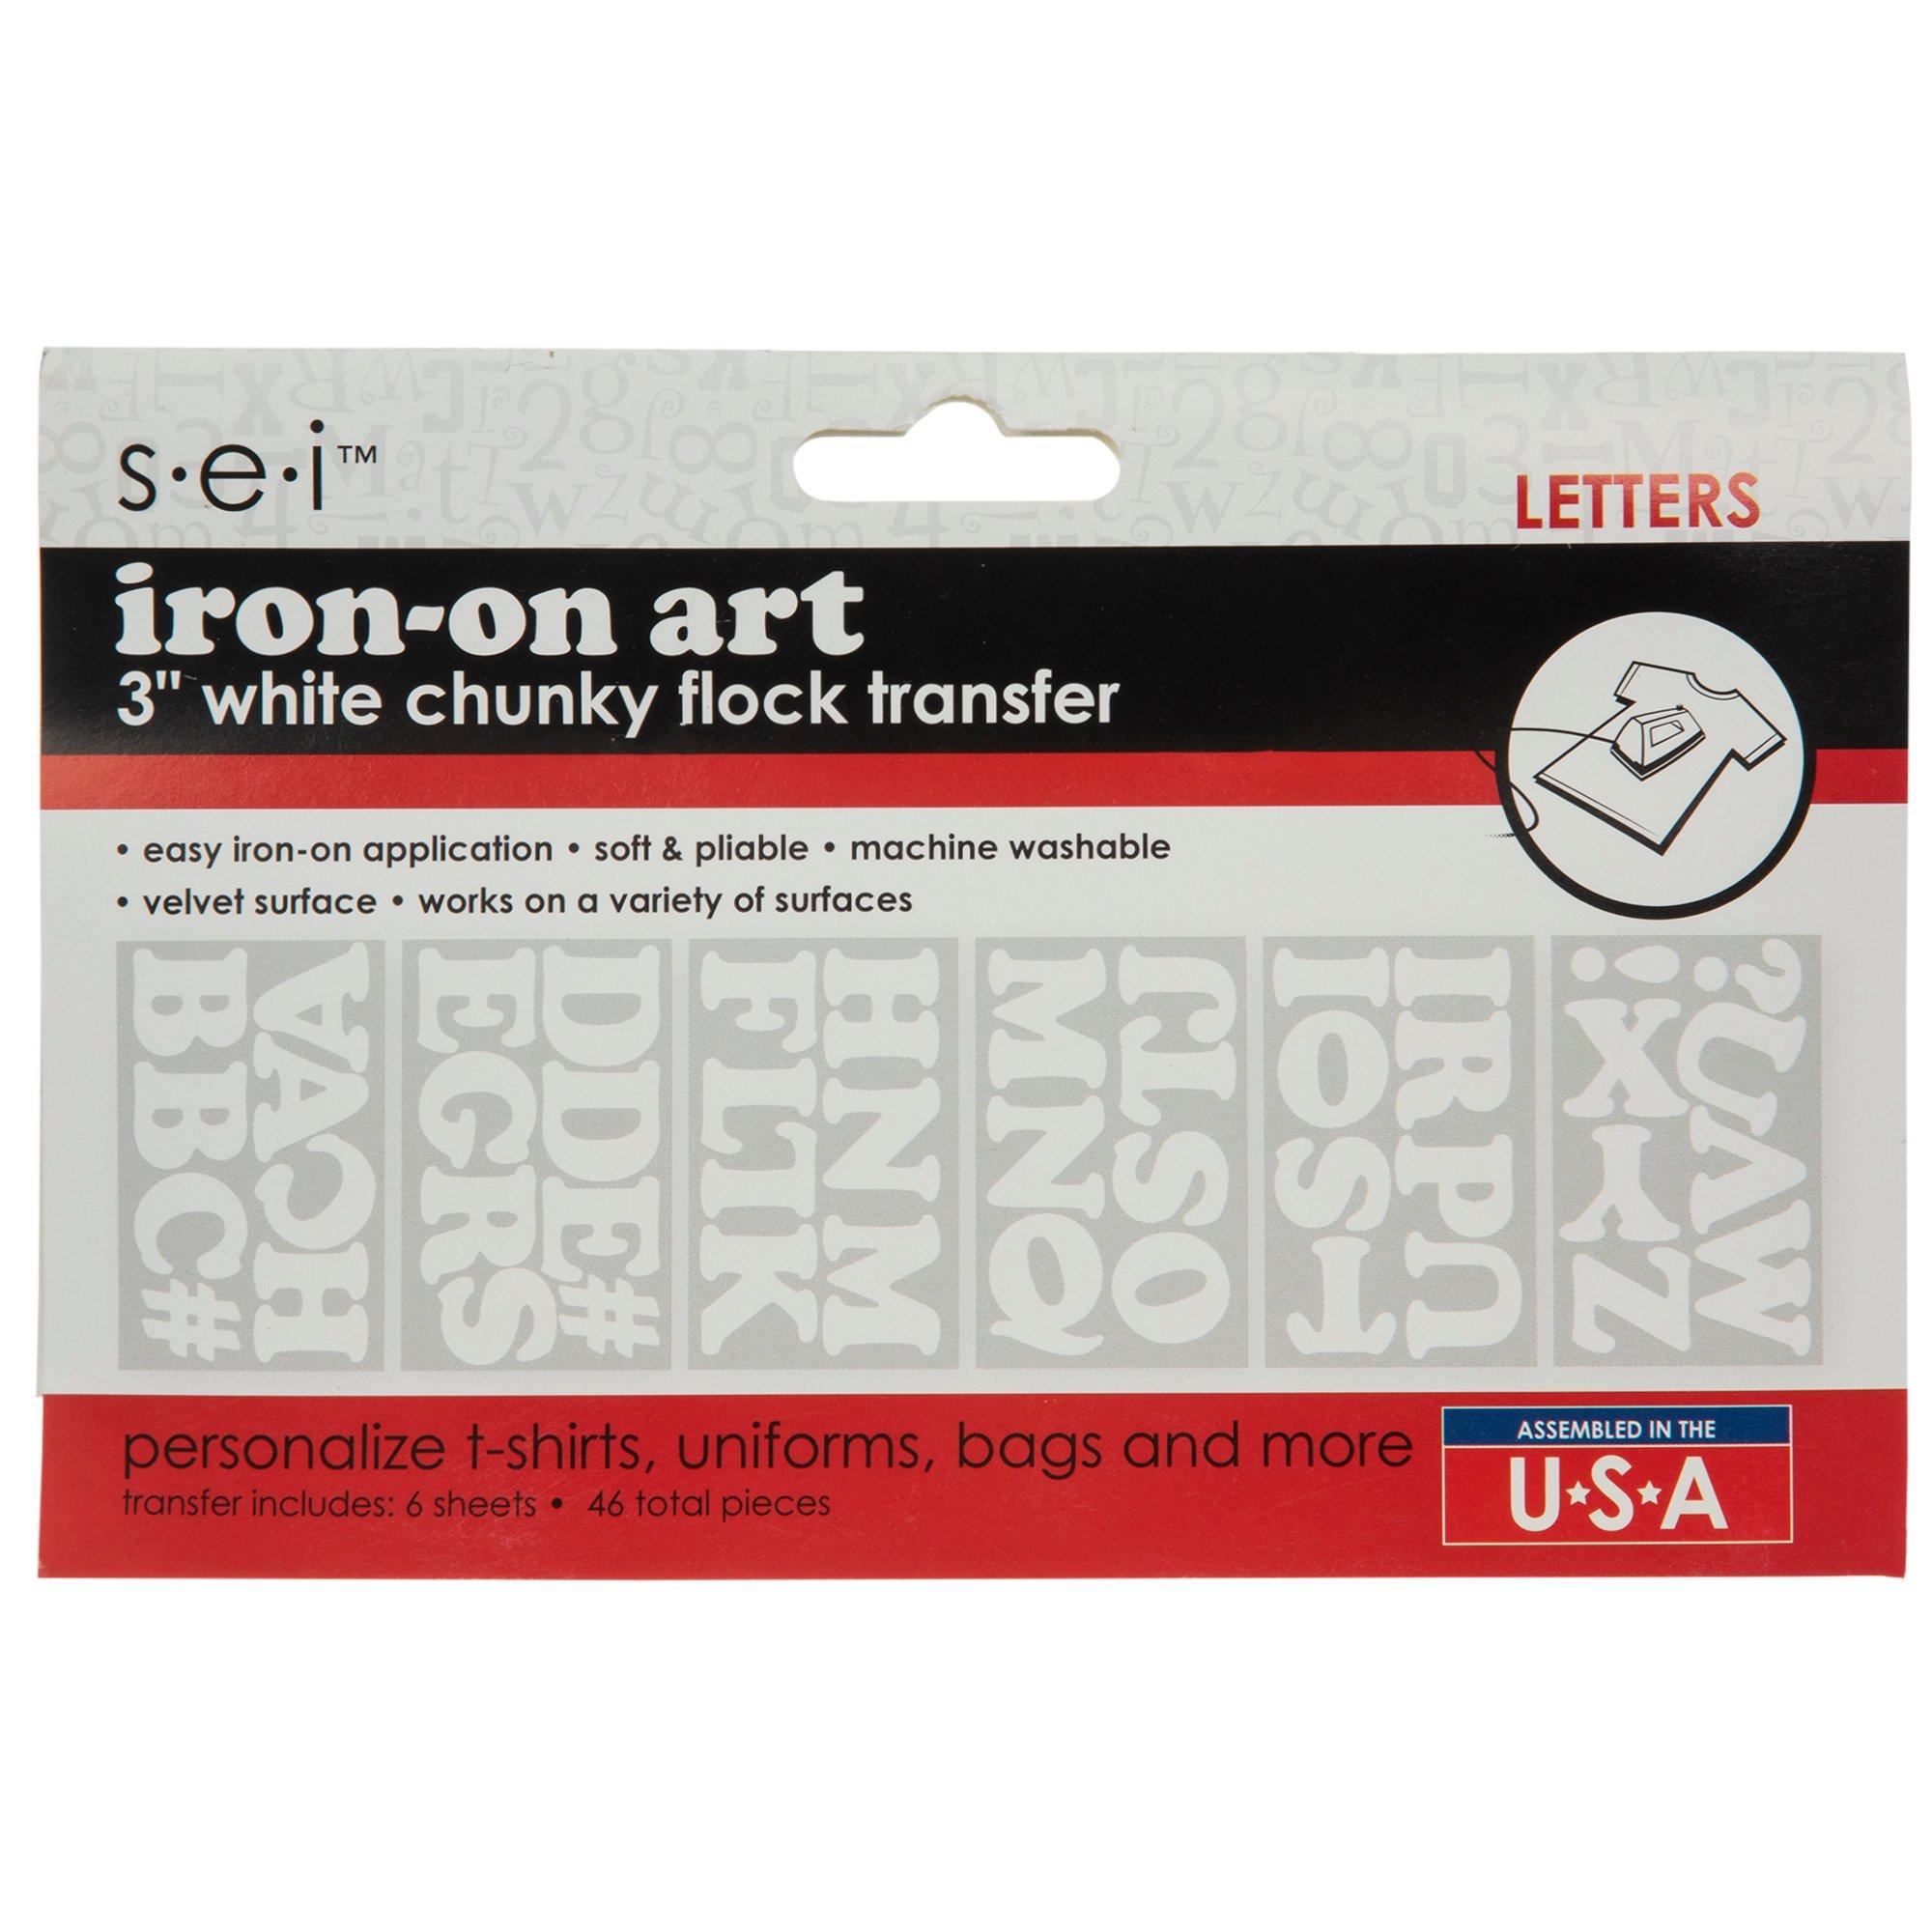 Embroidered Alphabet Letter Iron-On Patches, Hobby Lobby